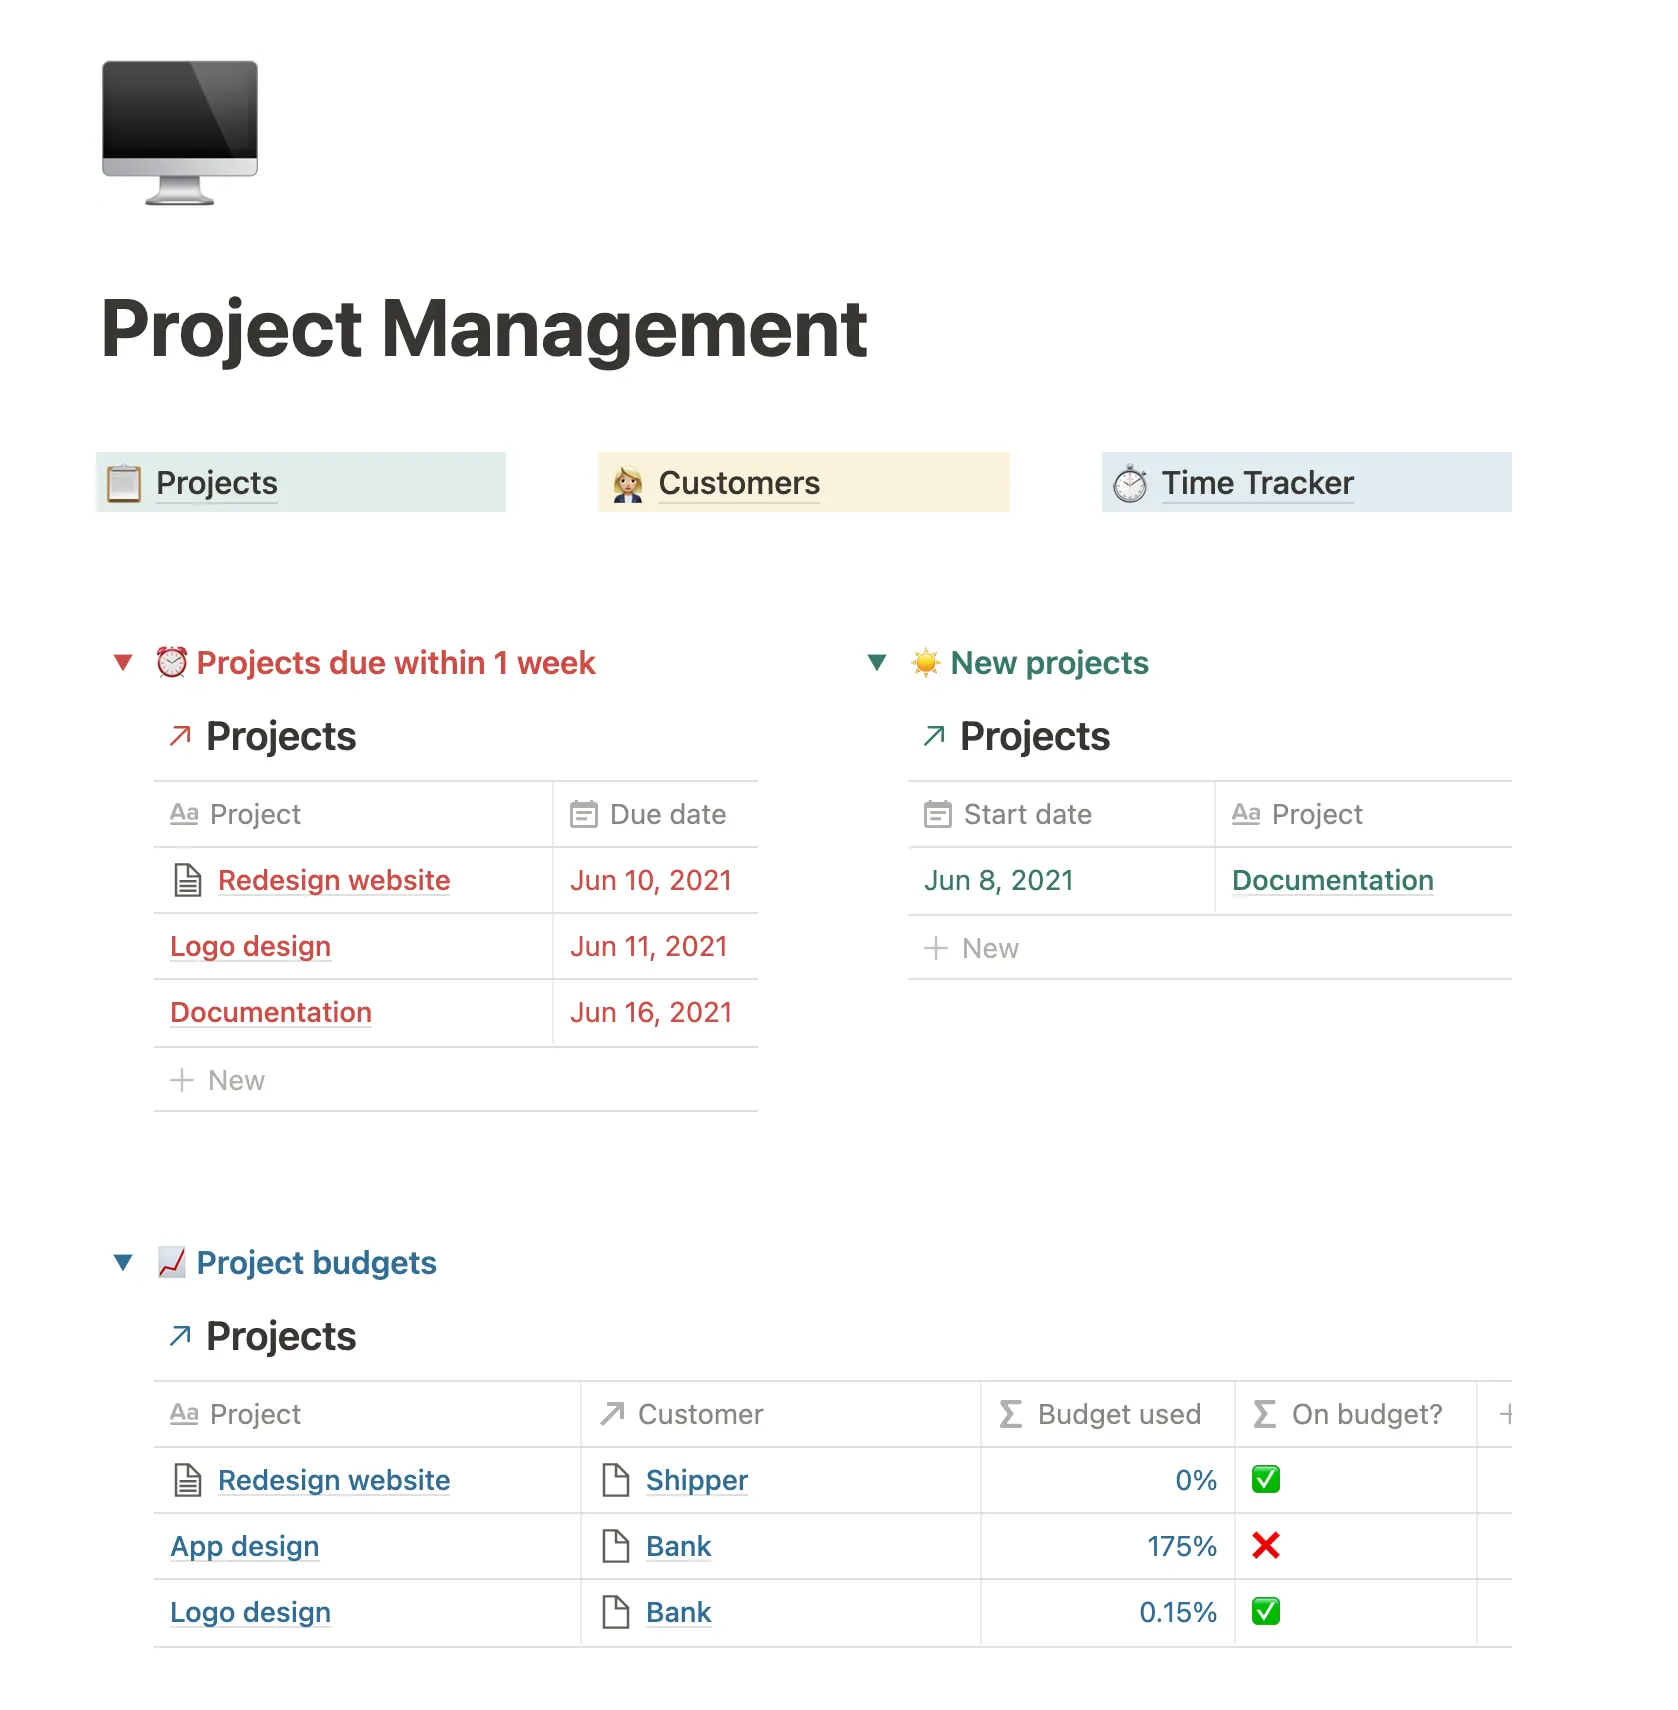 Project Management Dashboard image